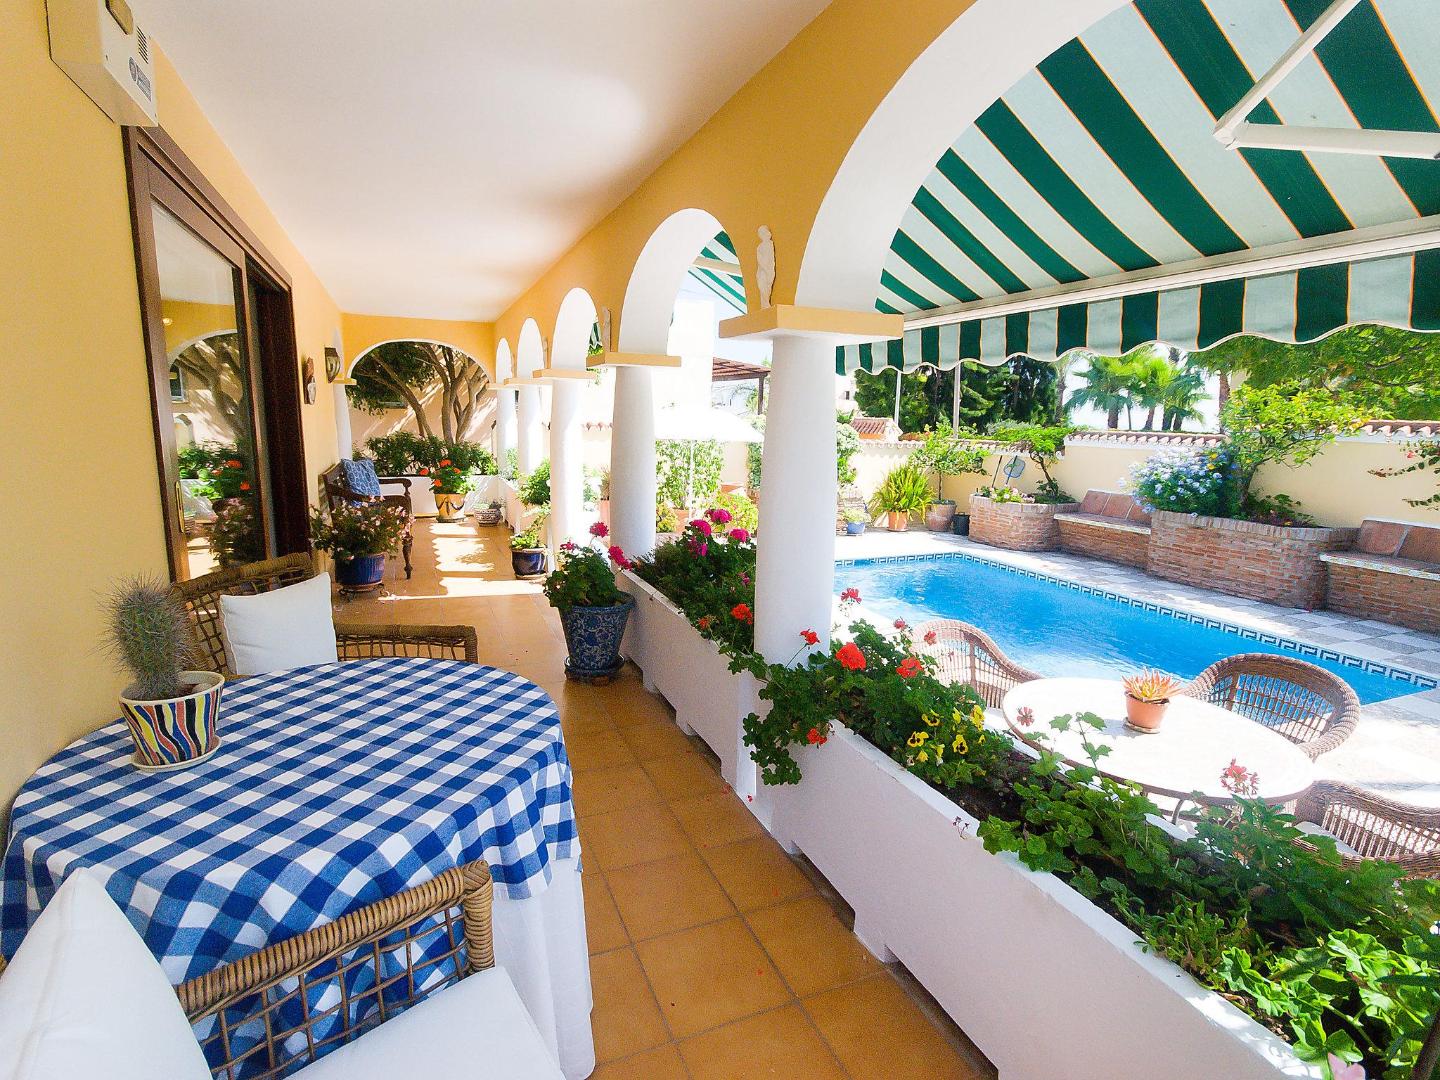 What are the best Villas hotels in Marbella?